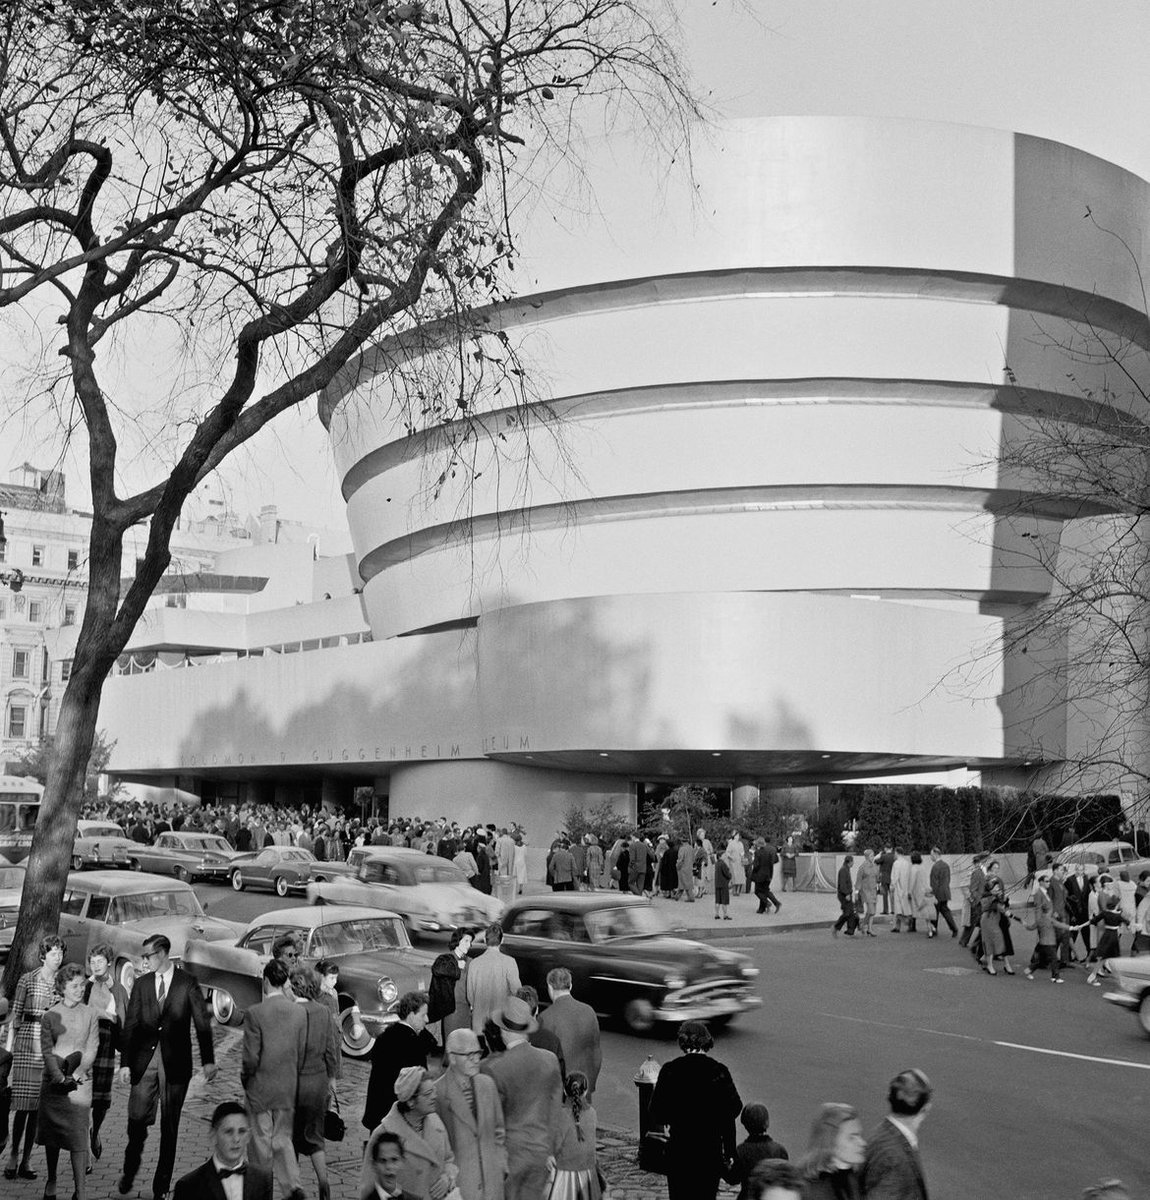 IT'S OUR BIRTHDAY! 🎂🎉🥳🎈 On this day in 1959, the doors opened to the Solomon R. Guggenheim Museum. Look at that line! Over 3,000 people waited in line to get in. 🥰 ___ Pictured: Opening day, Solomon R. Guggenheim Museum, New York, October 21, 1959. Photo by Robert E. Mates.